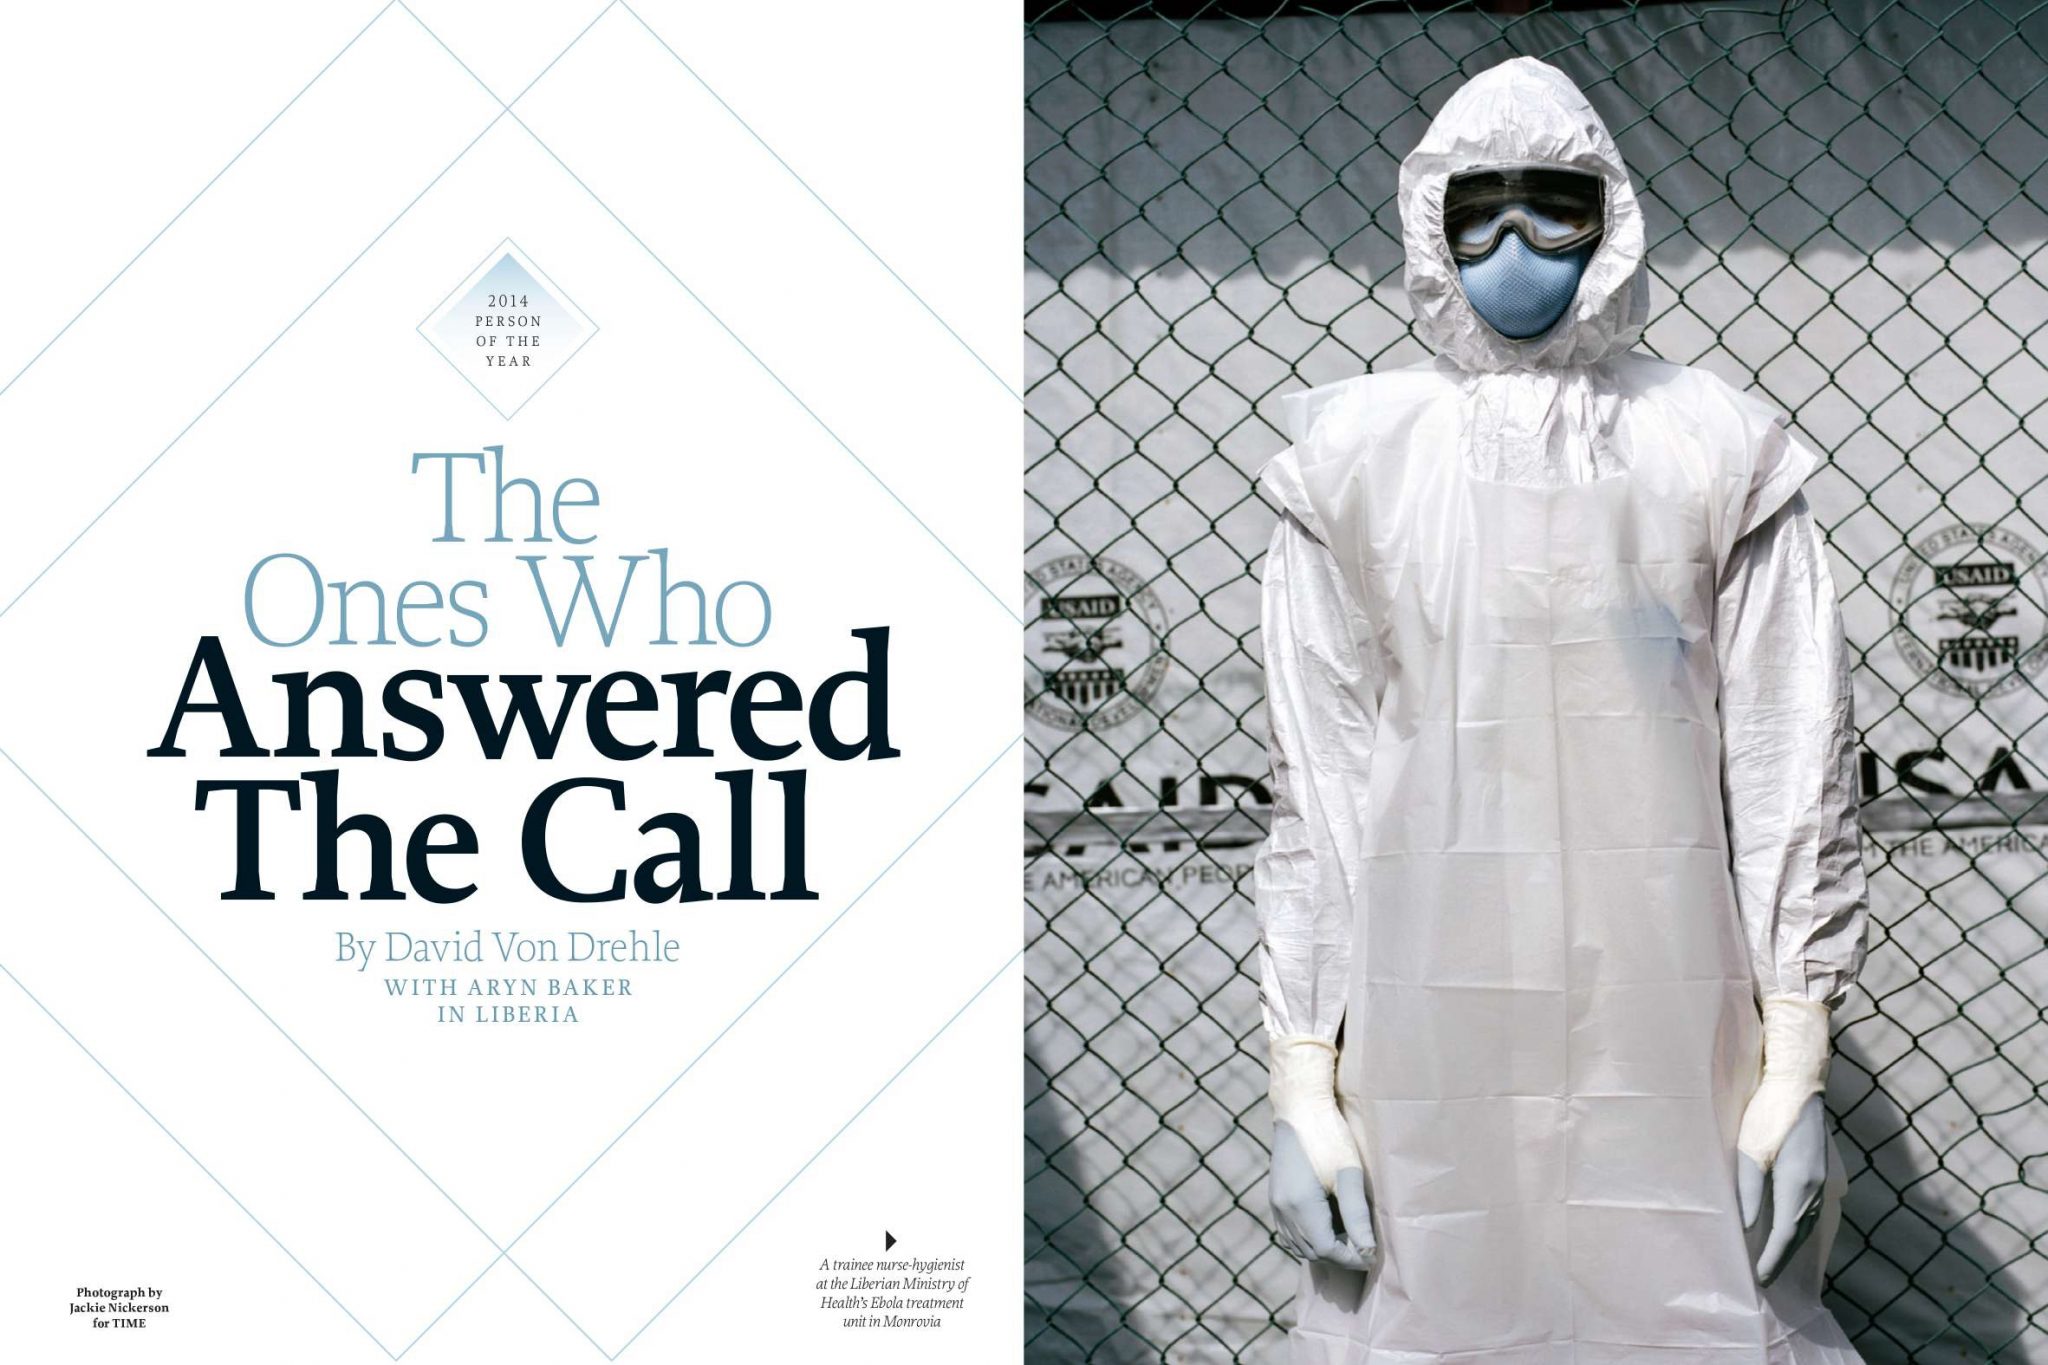  | Time Magazine: The Ebola Fighters | 2